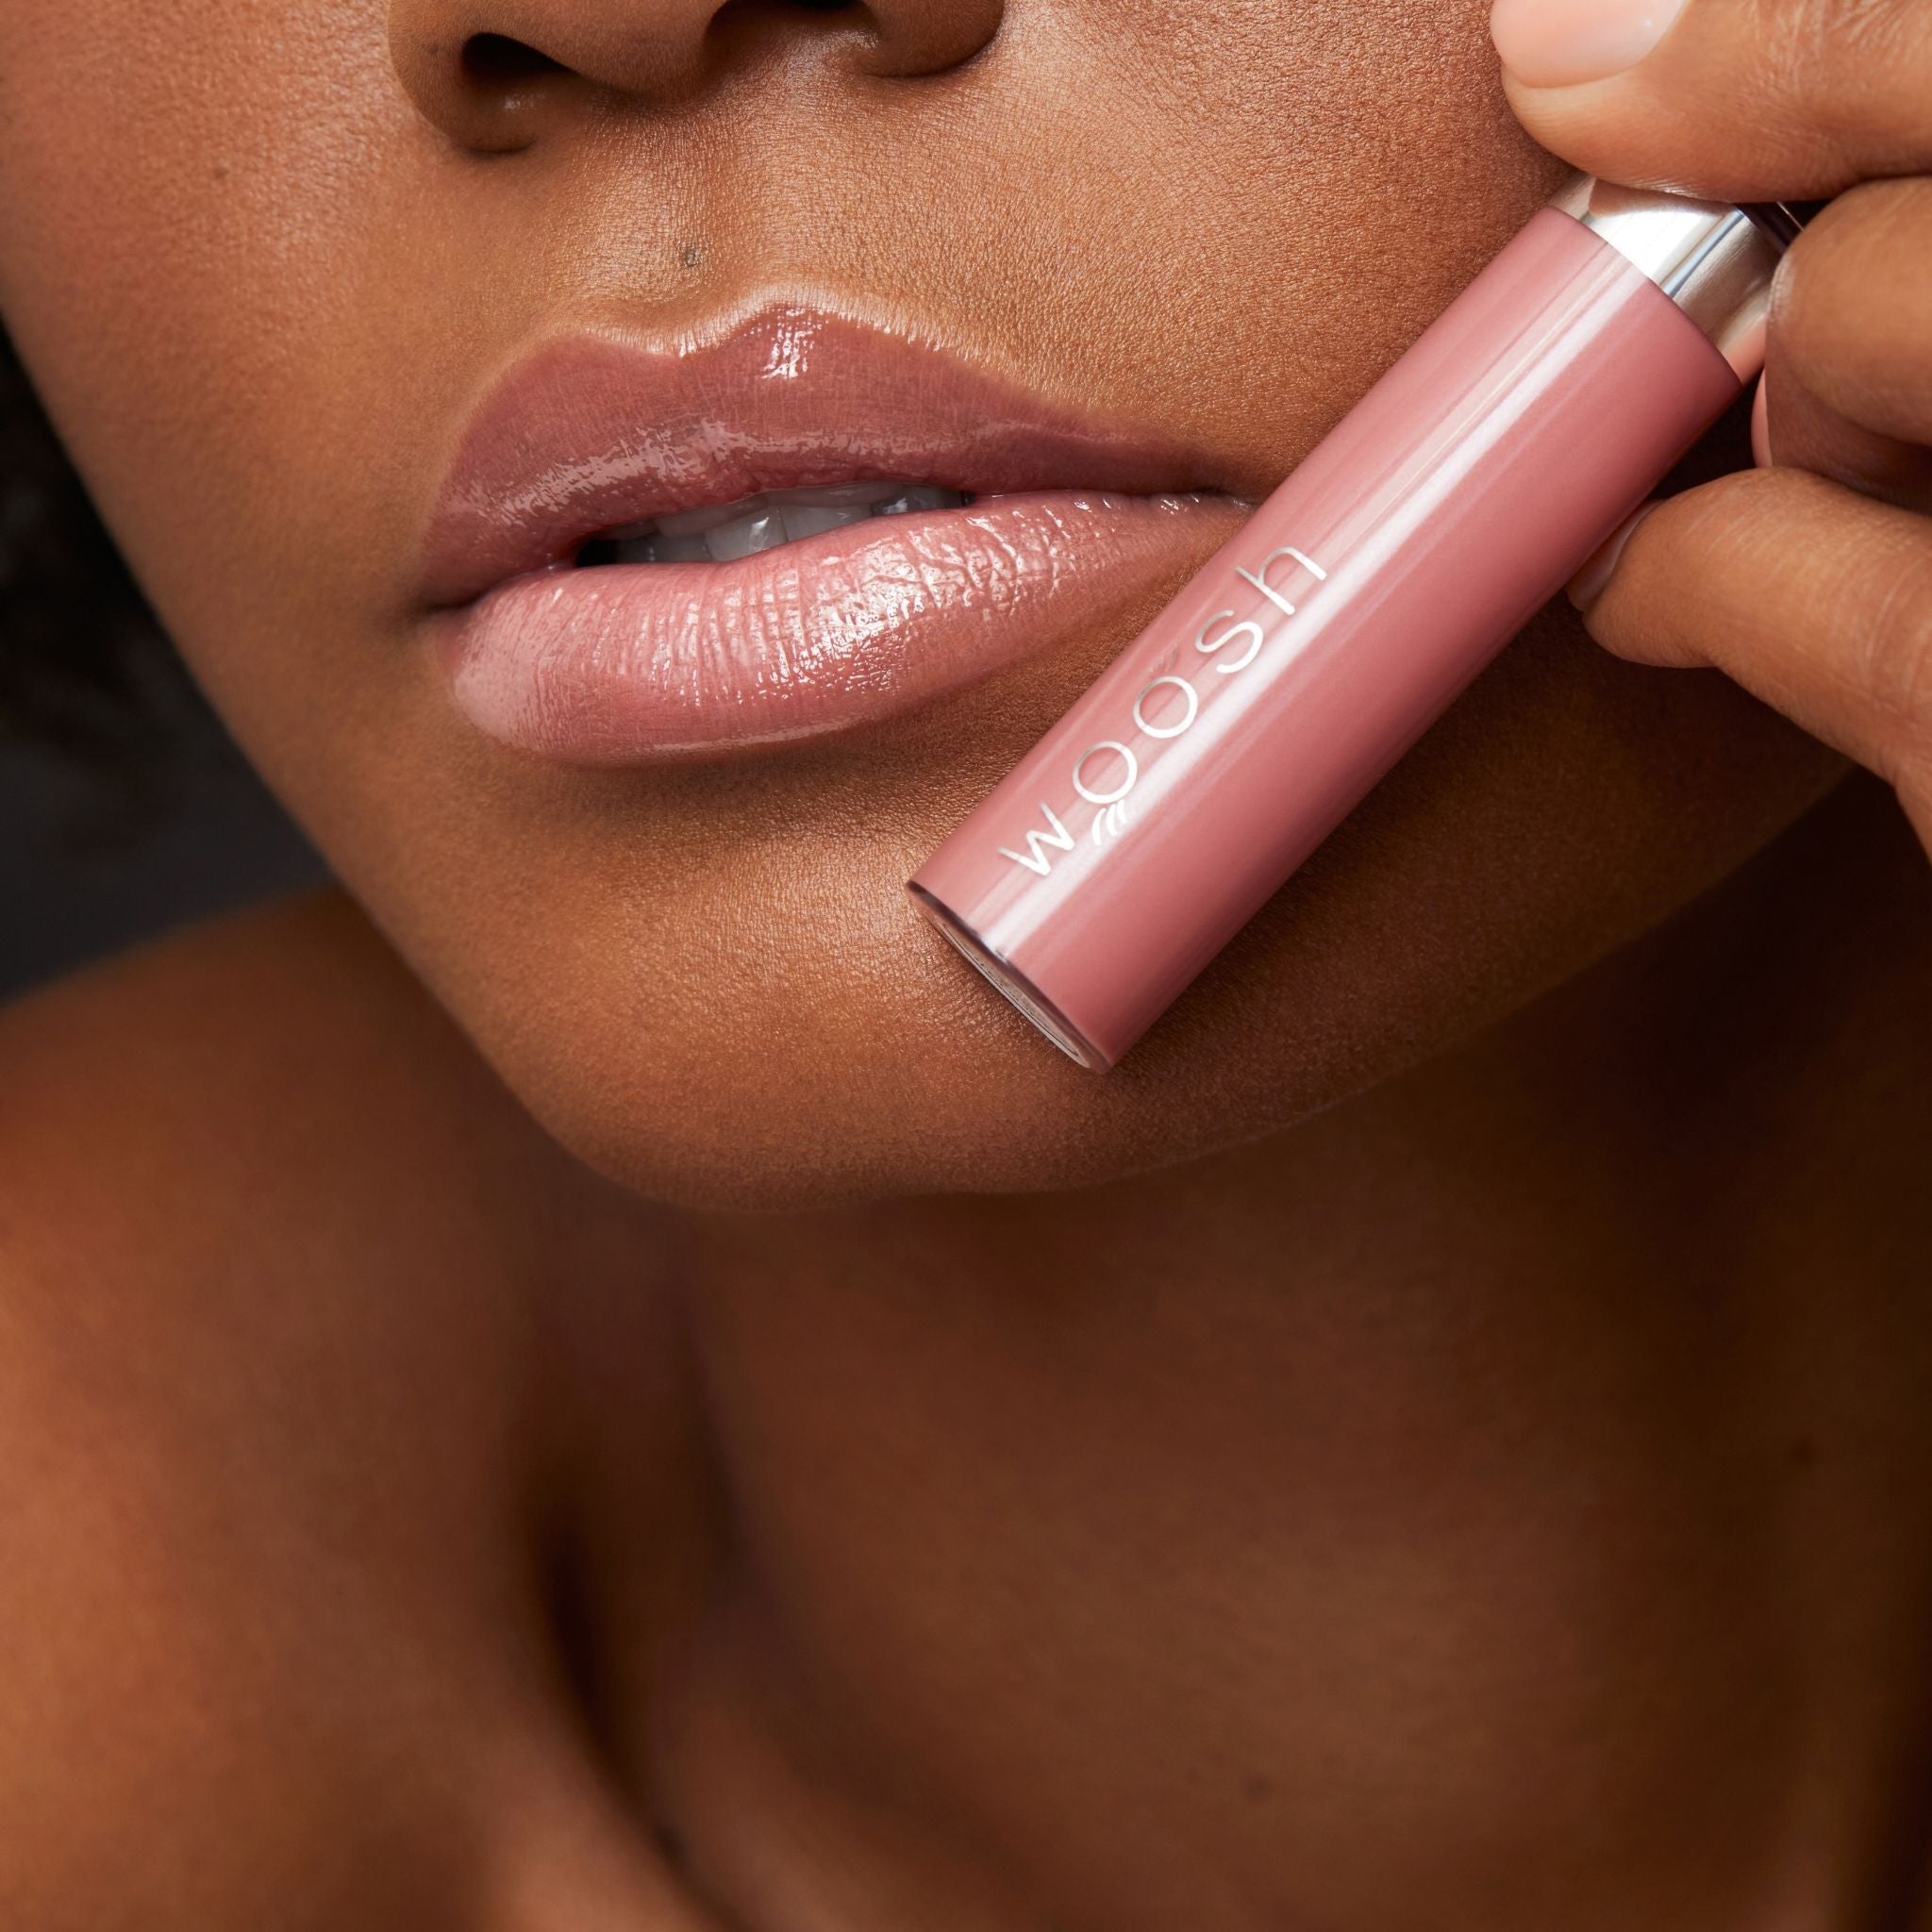 Previously known as beige natural, hint is now infused with shea butter and hyaluronic acid. The perfect nude light pink shade. Photo of model holding bottle close to lip.